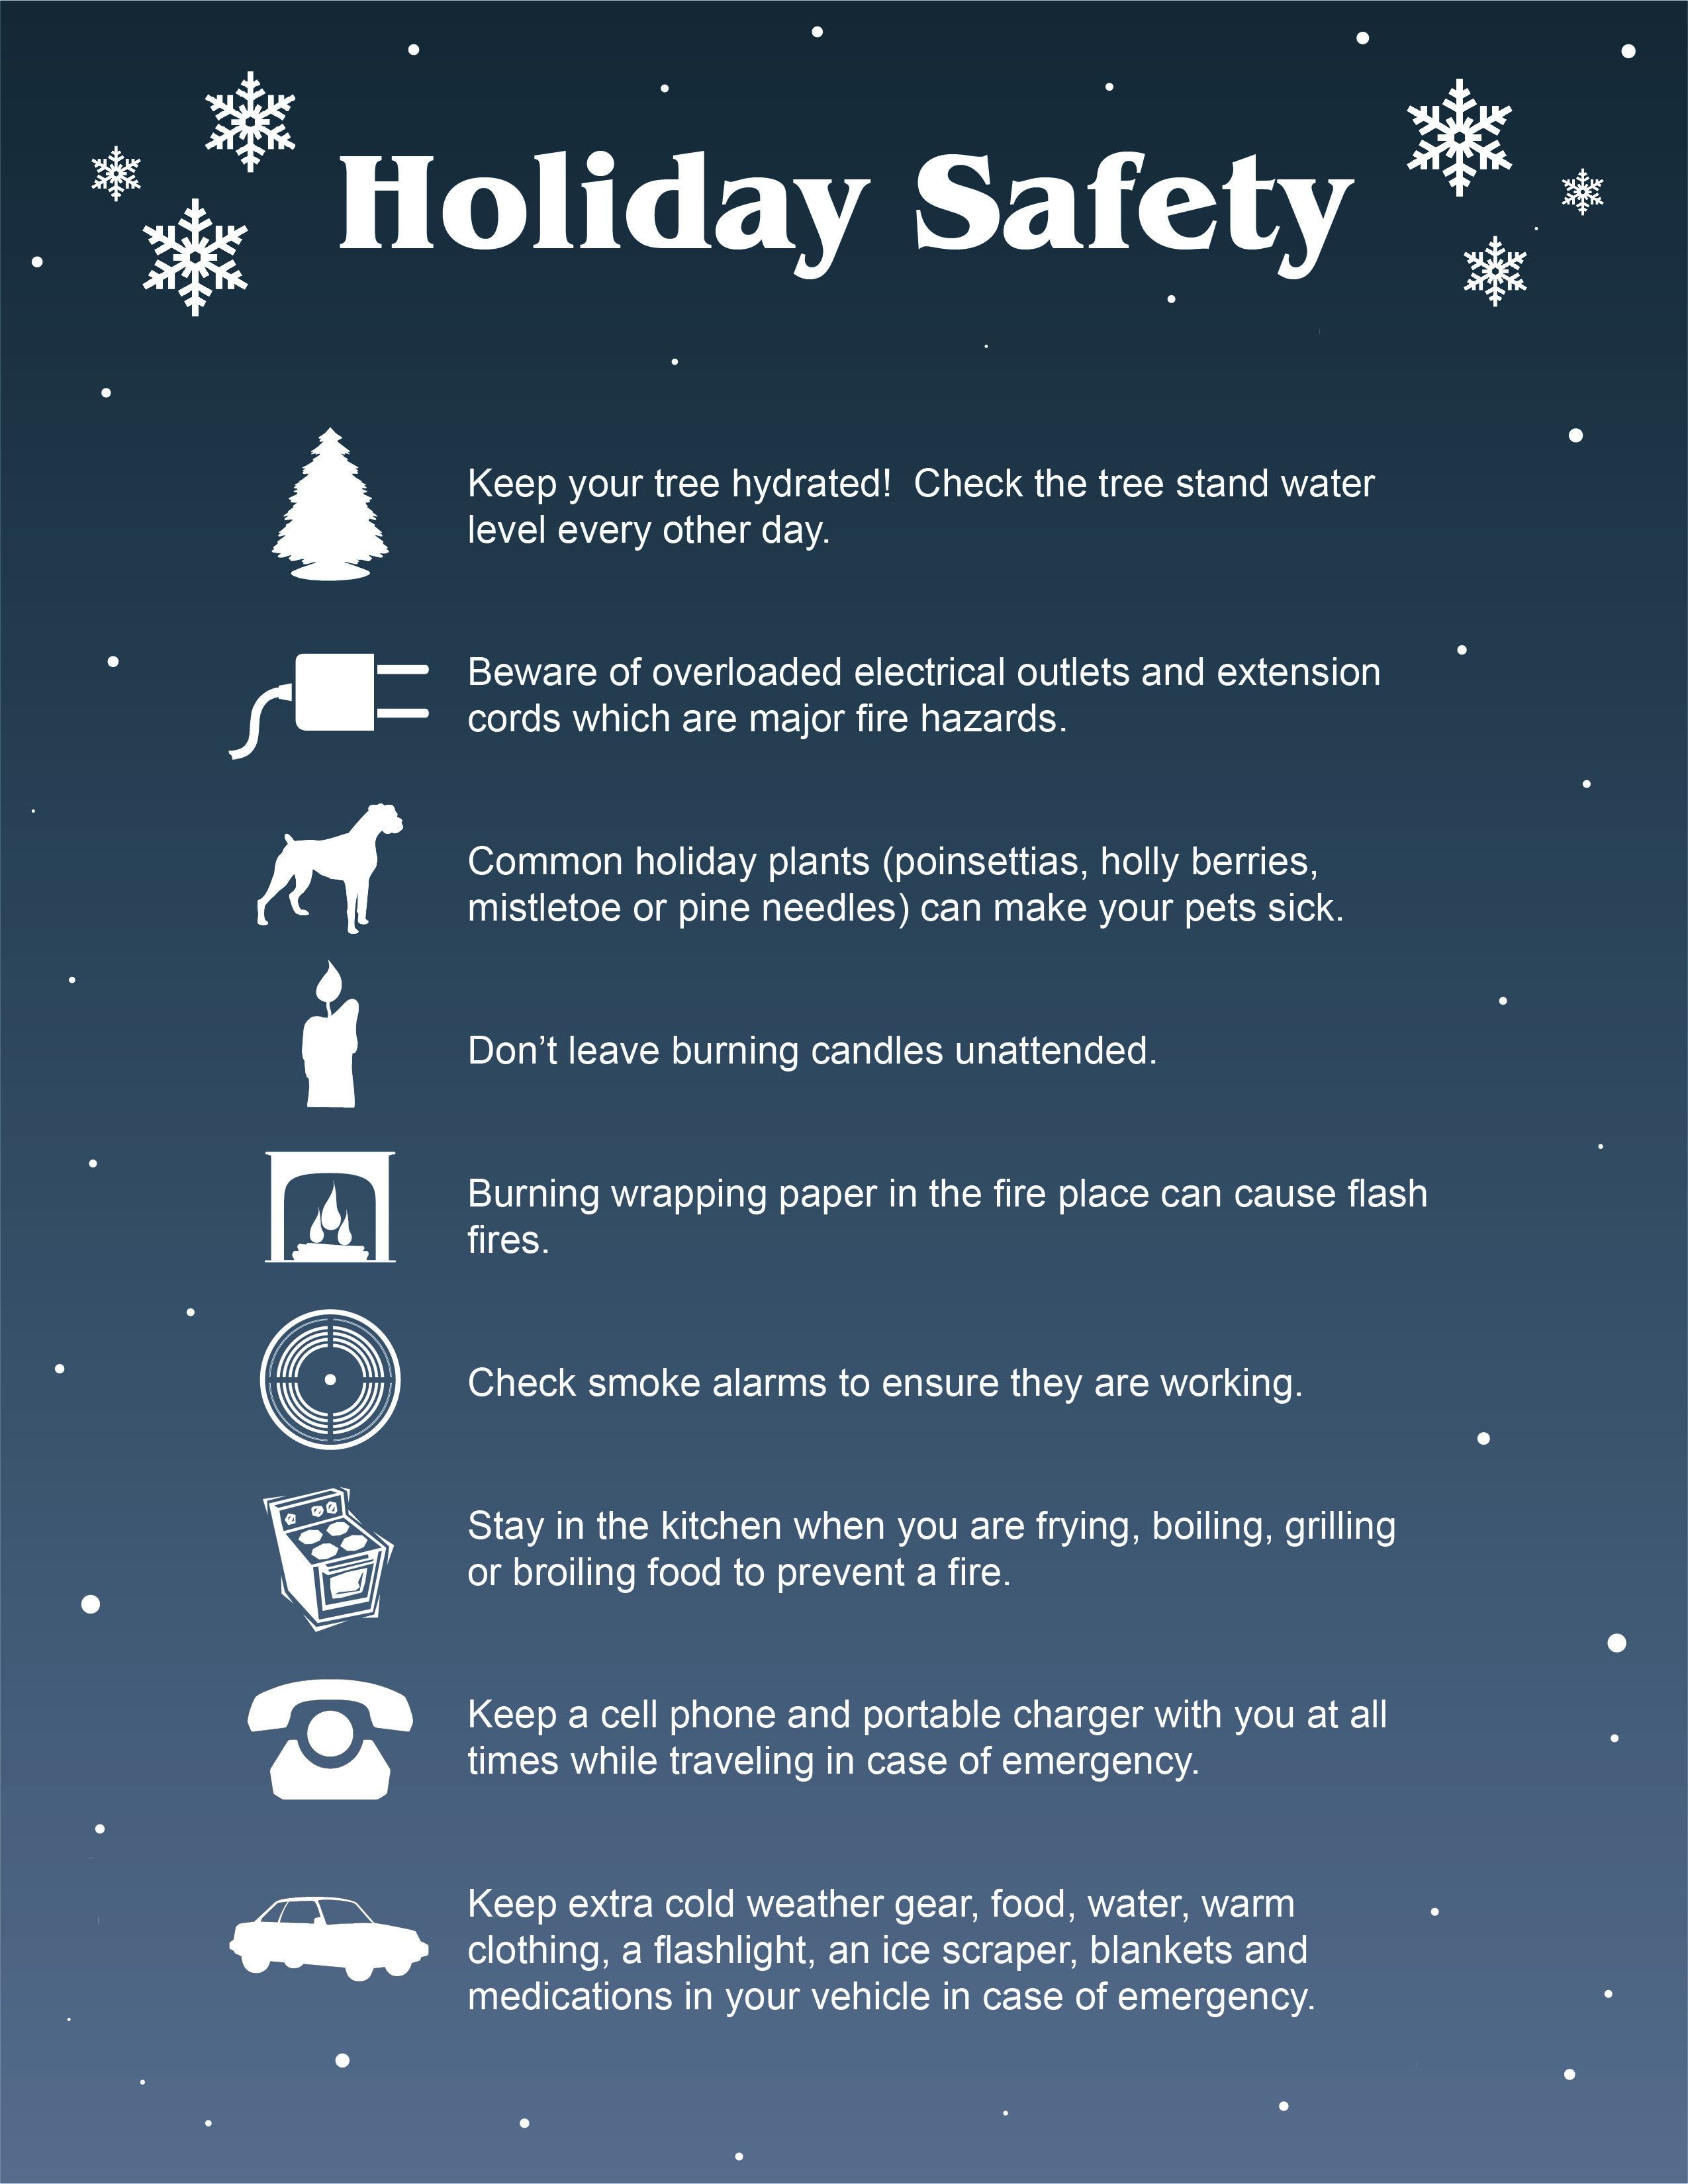 II. Common Holiday Hazards for Dogs